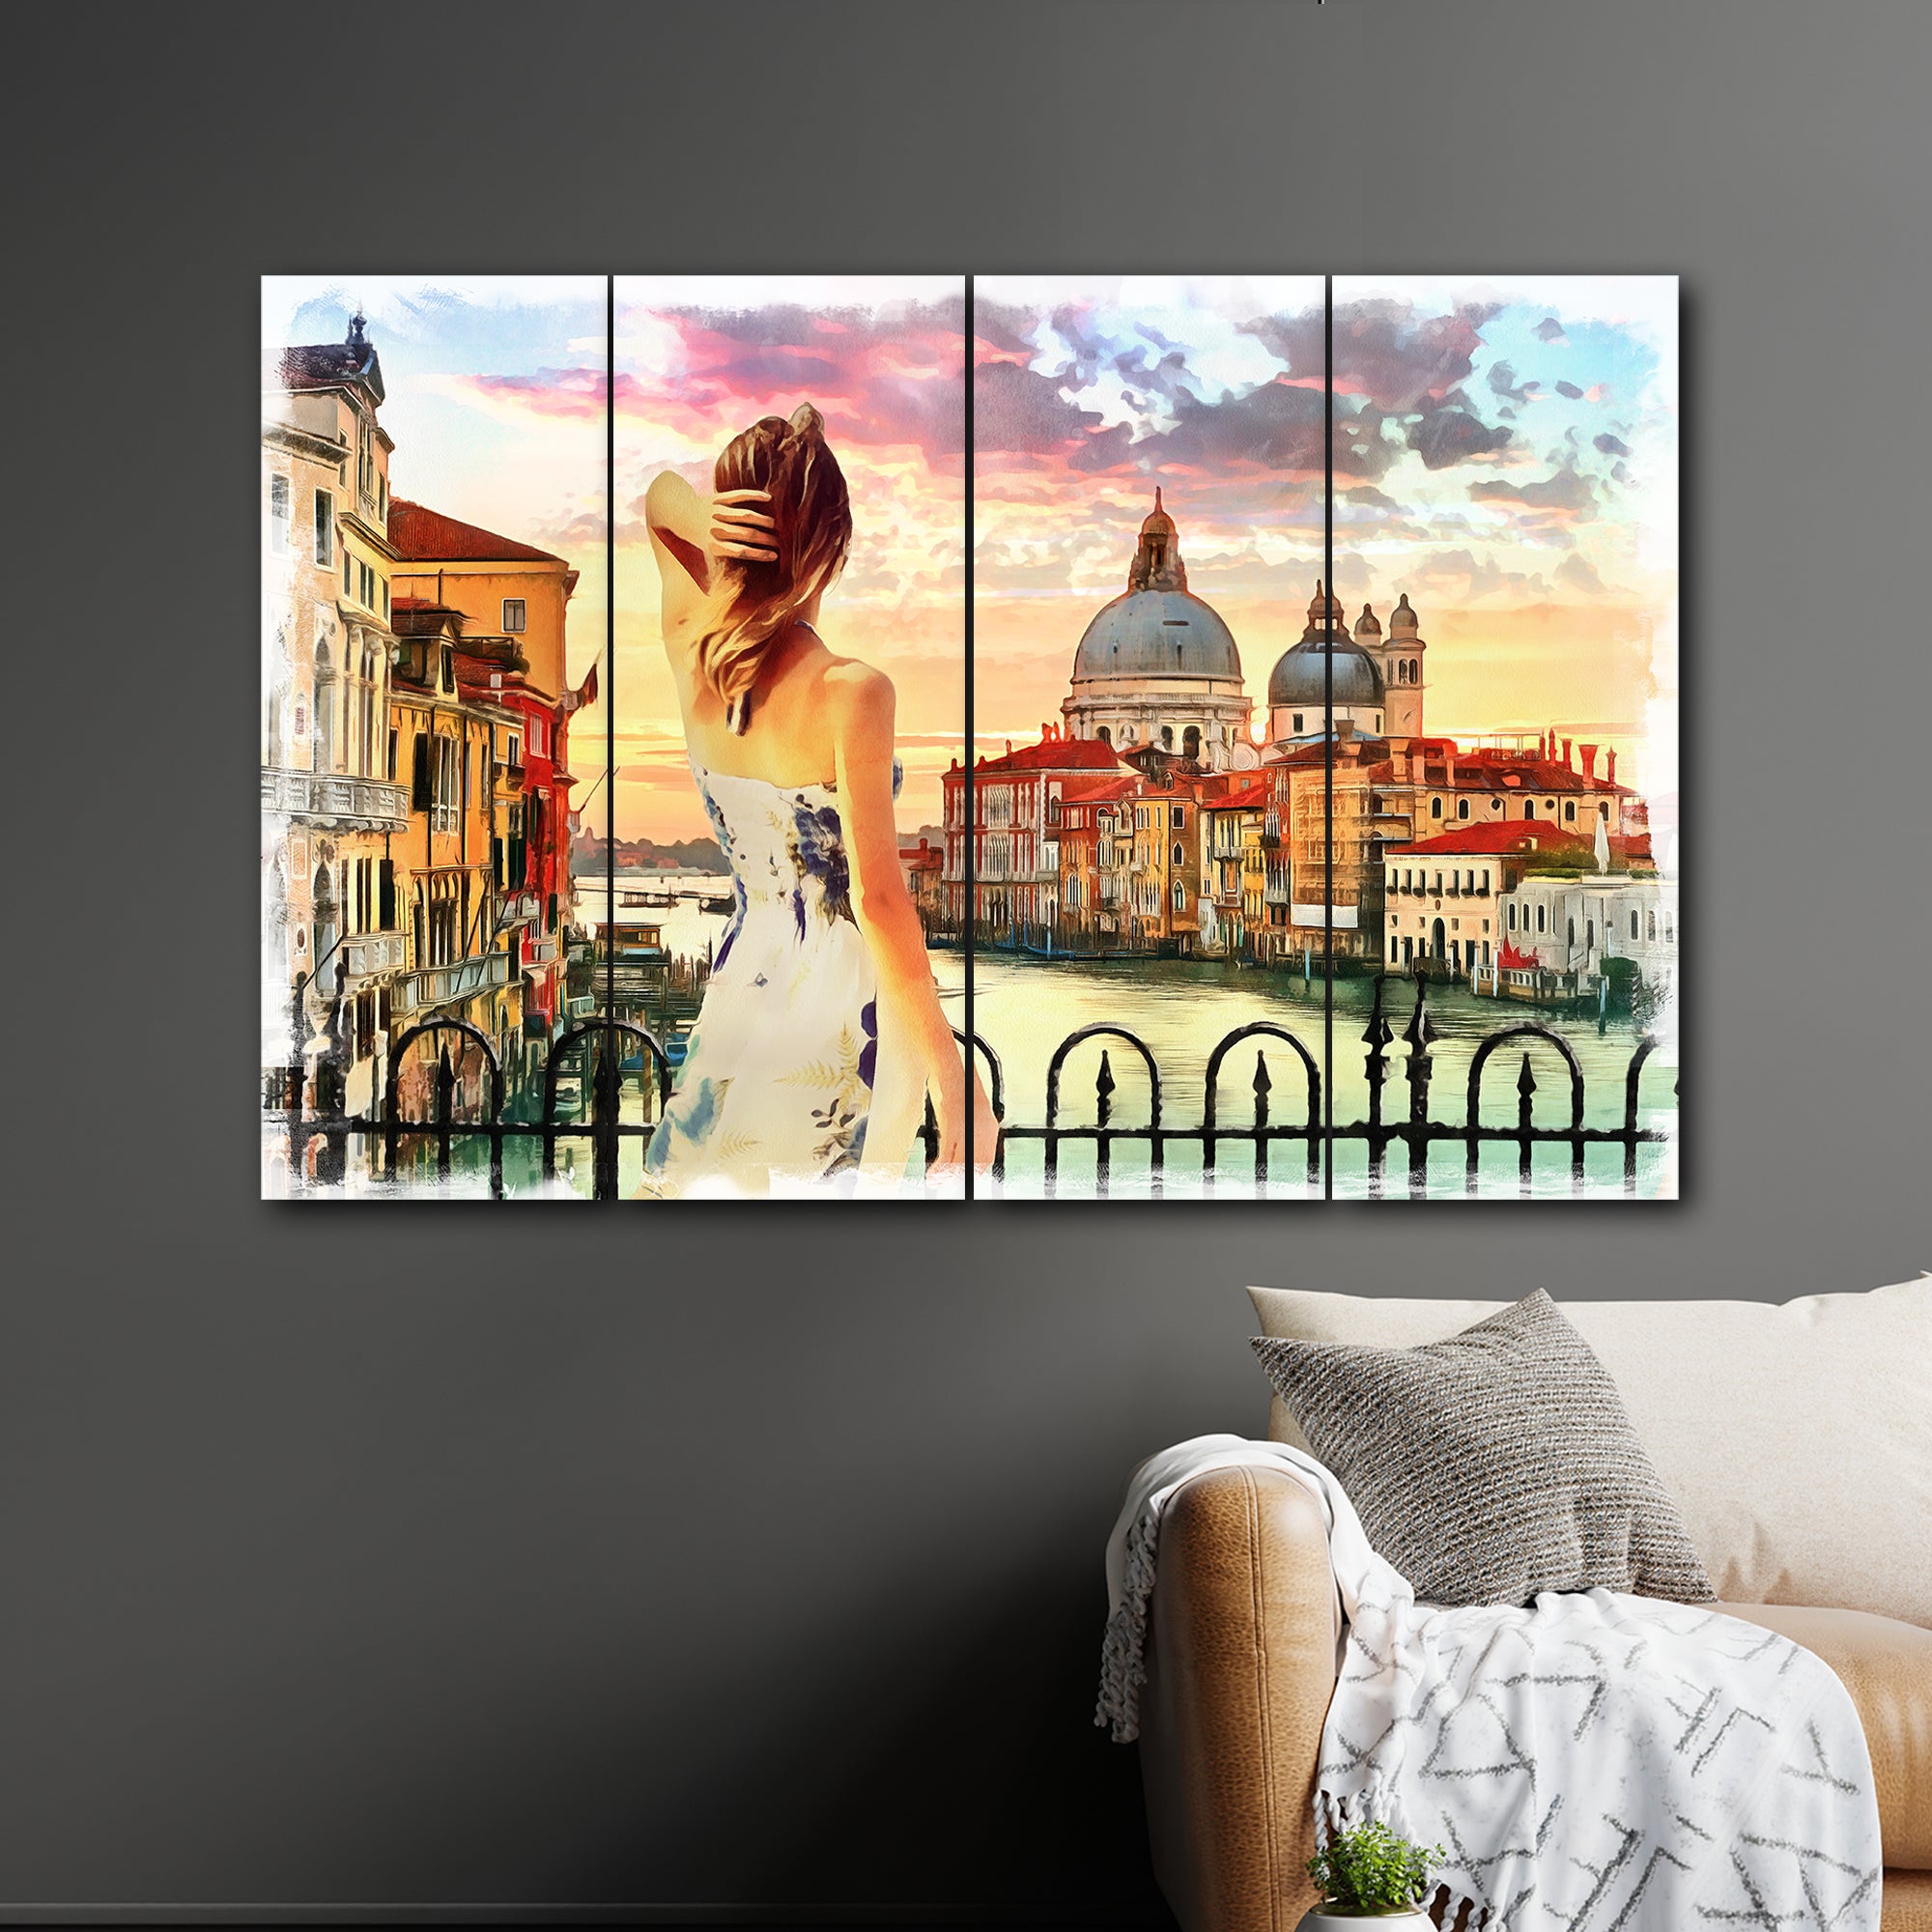 Girl In City View Abstract In 4 Panel Painting